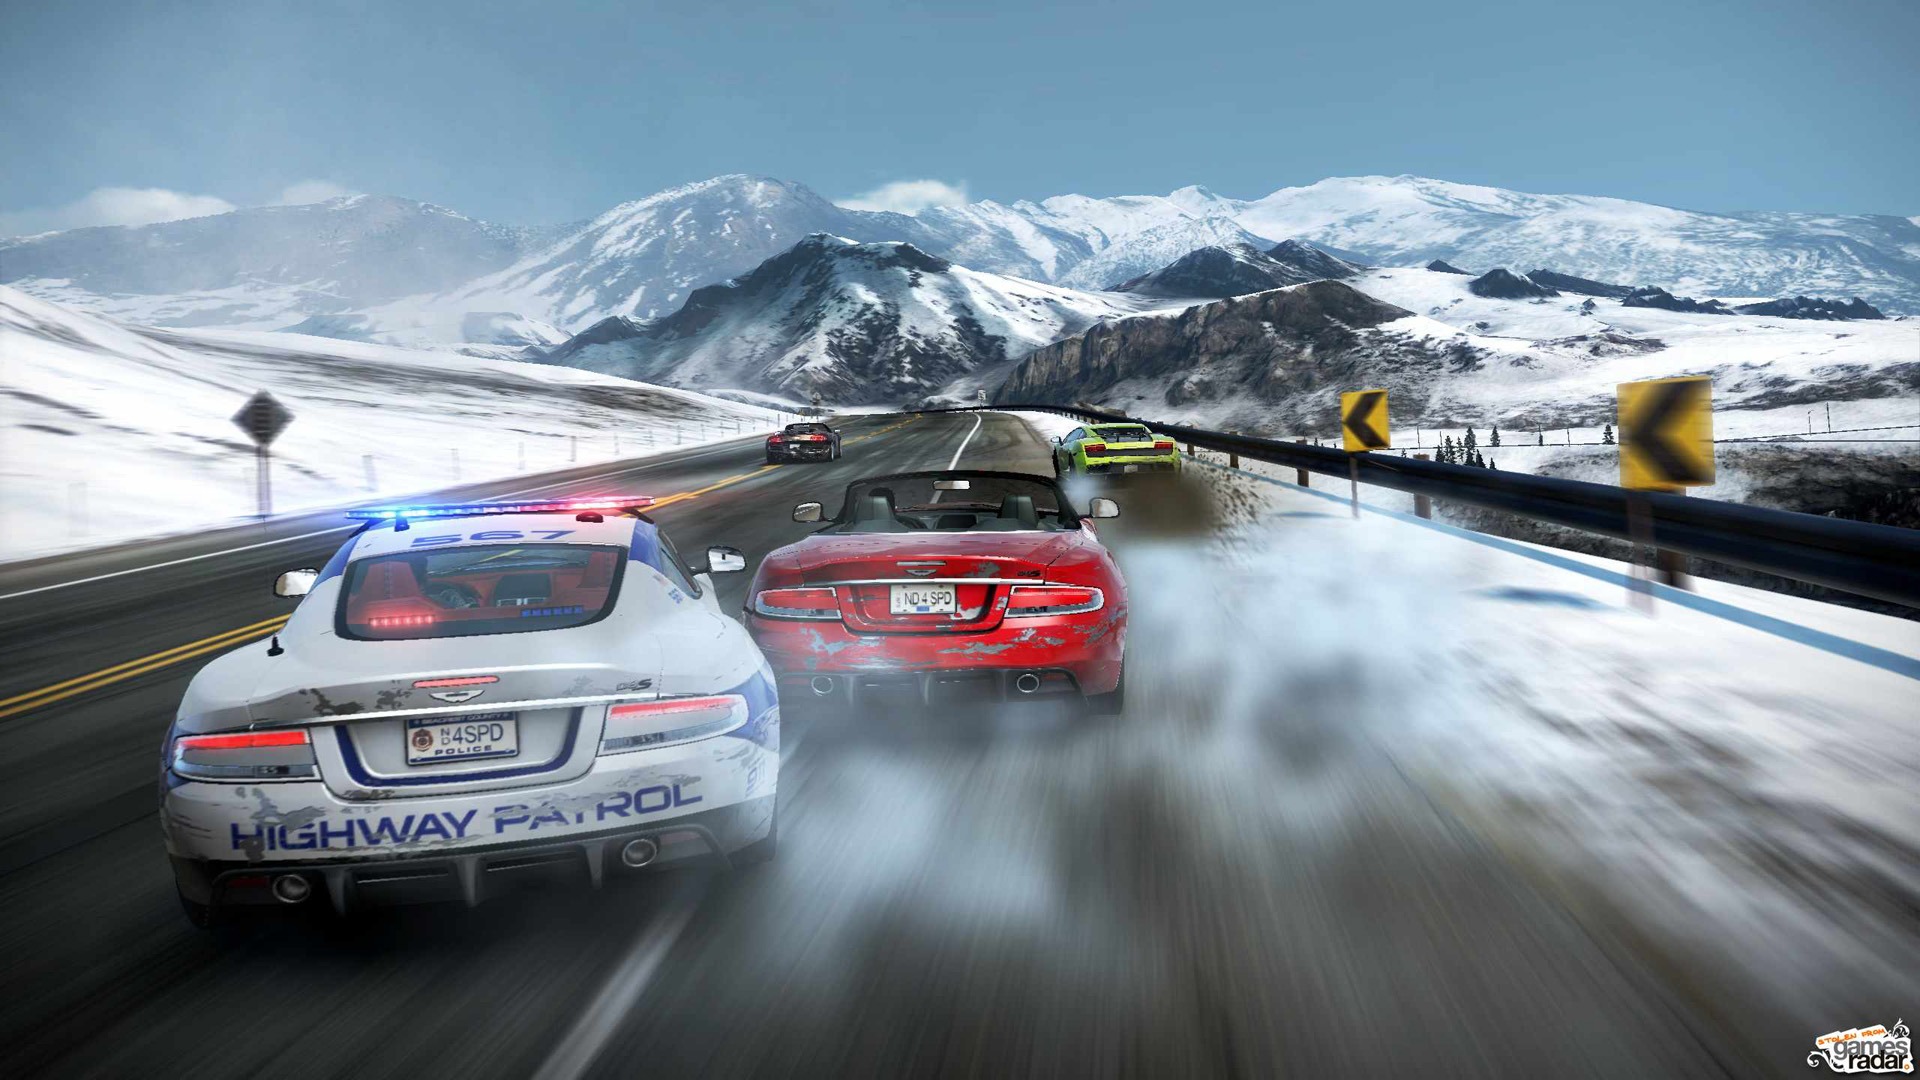 Need for Speed: Hot Pursuit 极品飞车14：热力追踪5 - 1920x1080